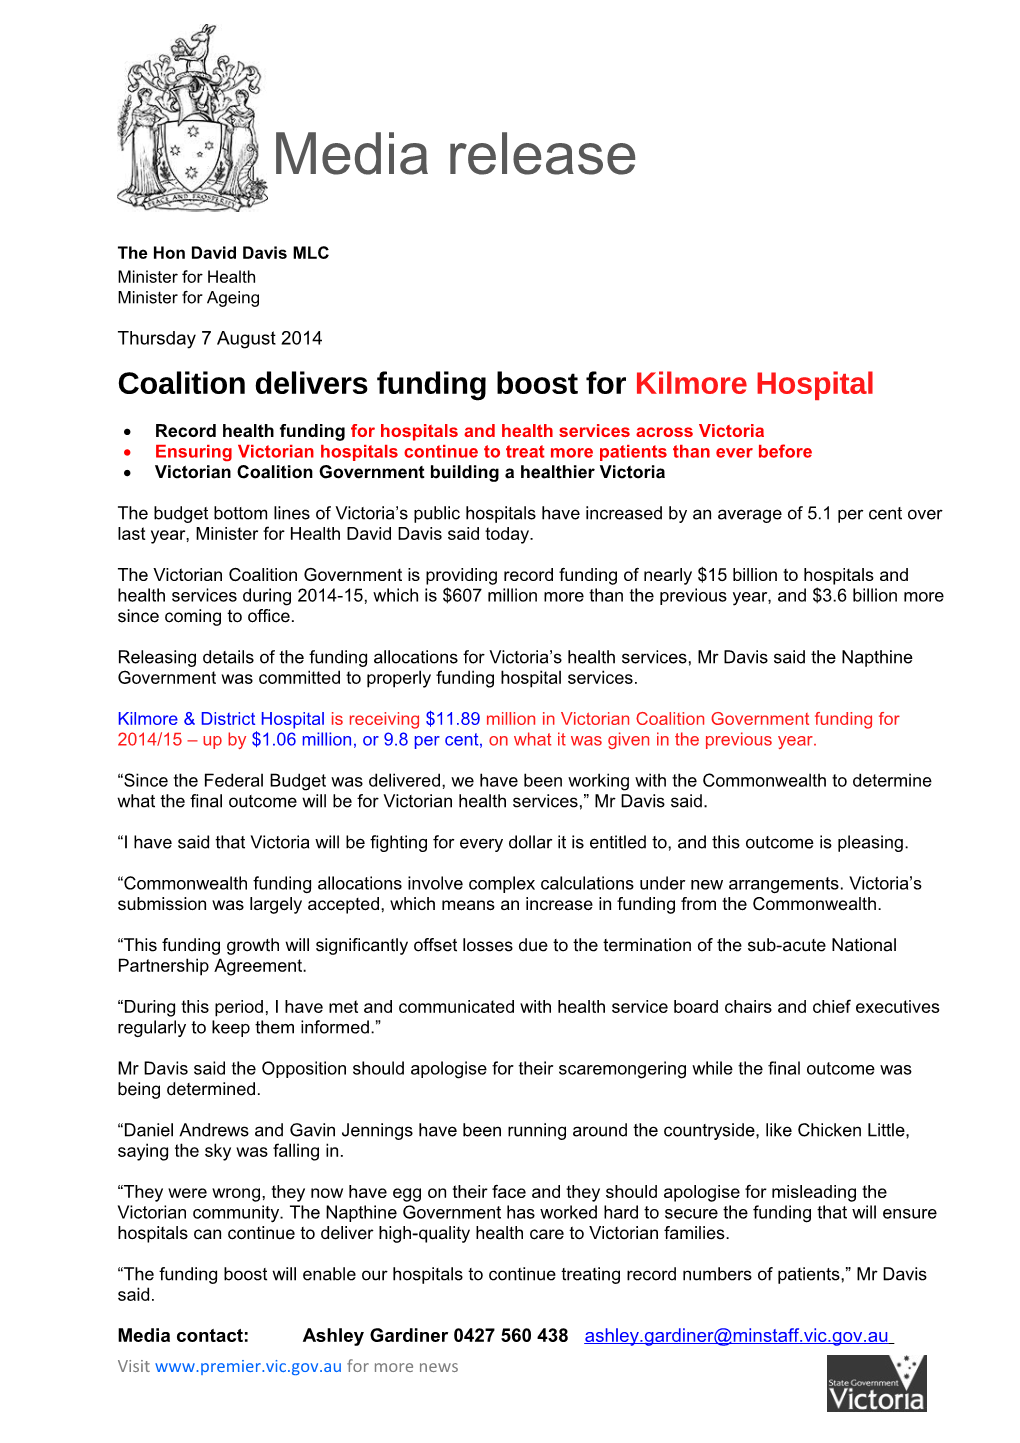 Coalition Delivers Funding Boost for Kilmore Hospital